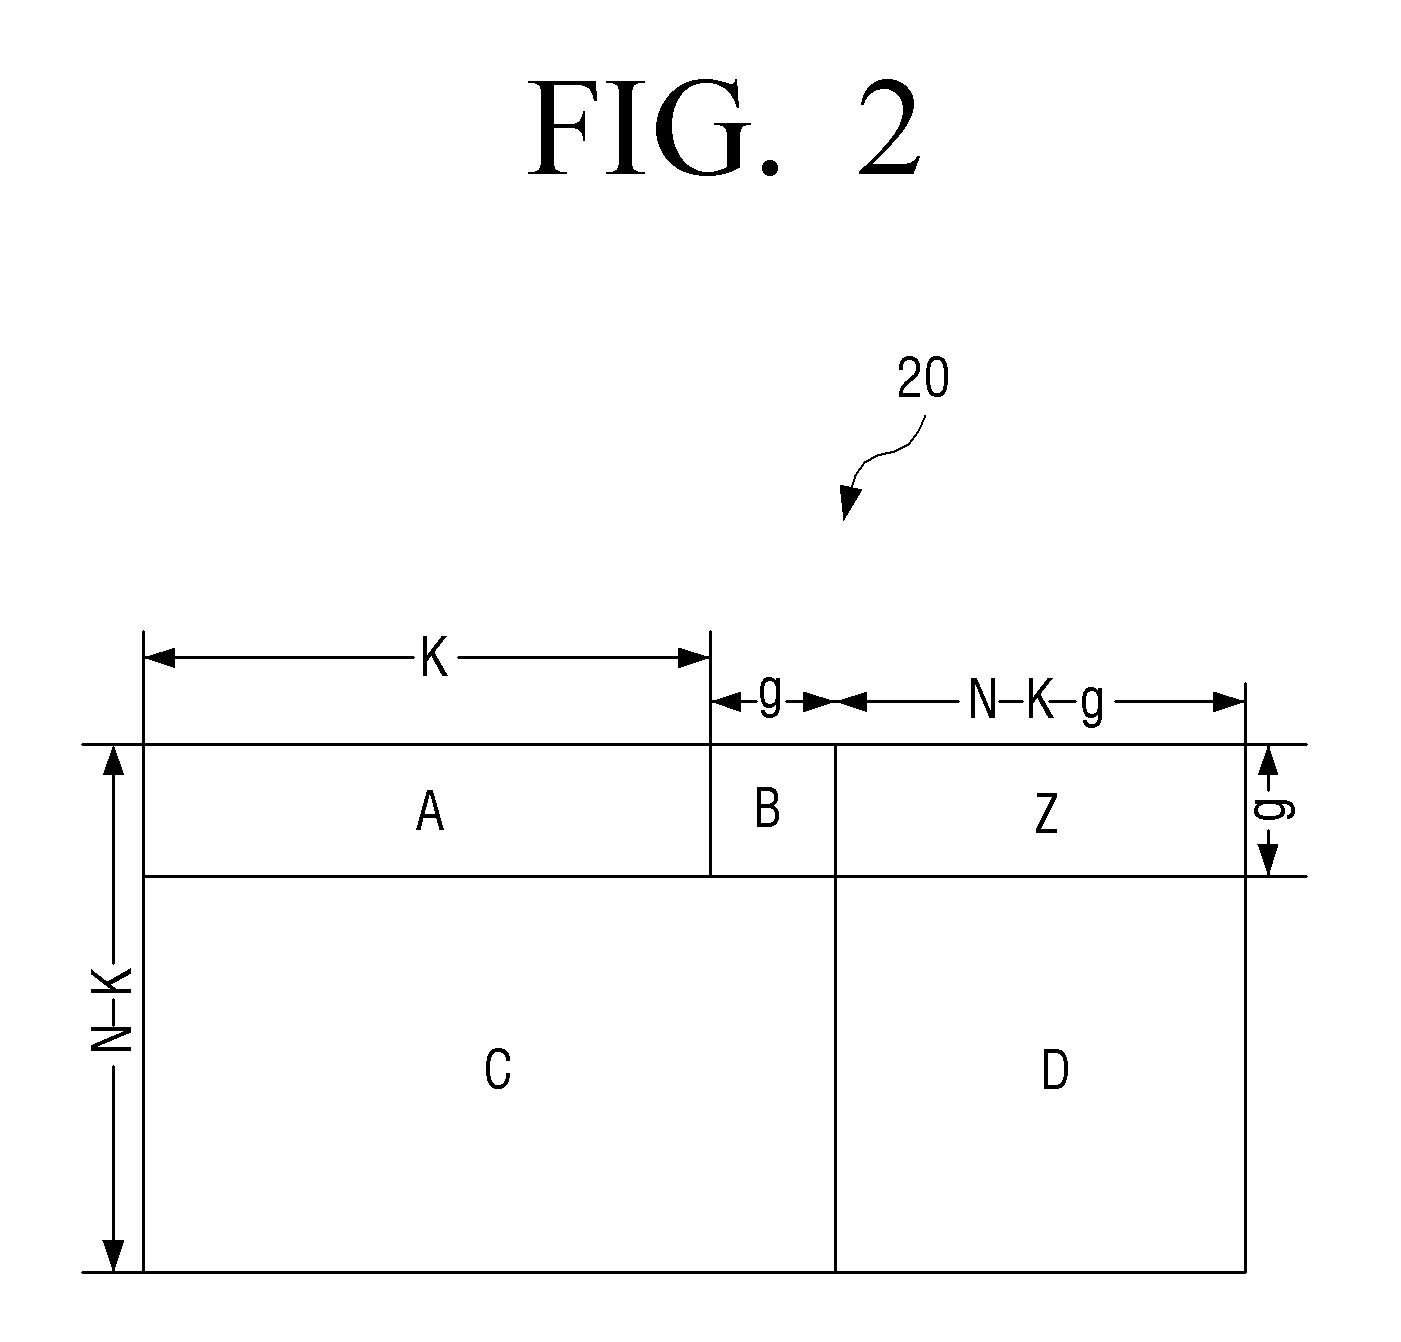 Transmitter and puncturing method thereof